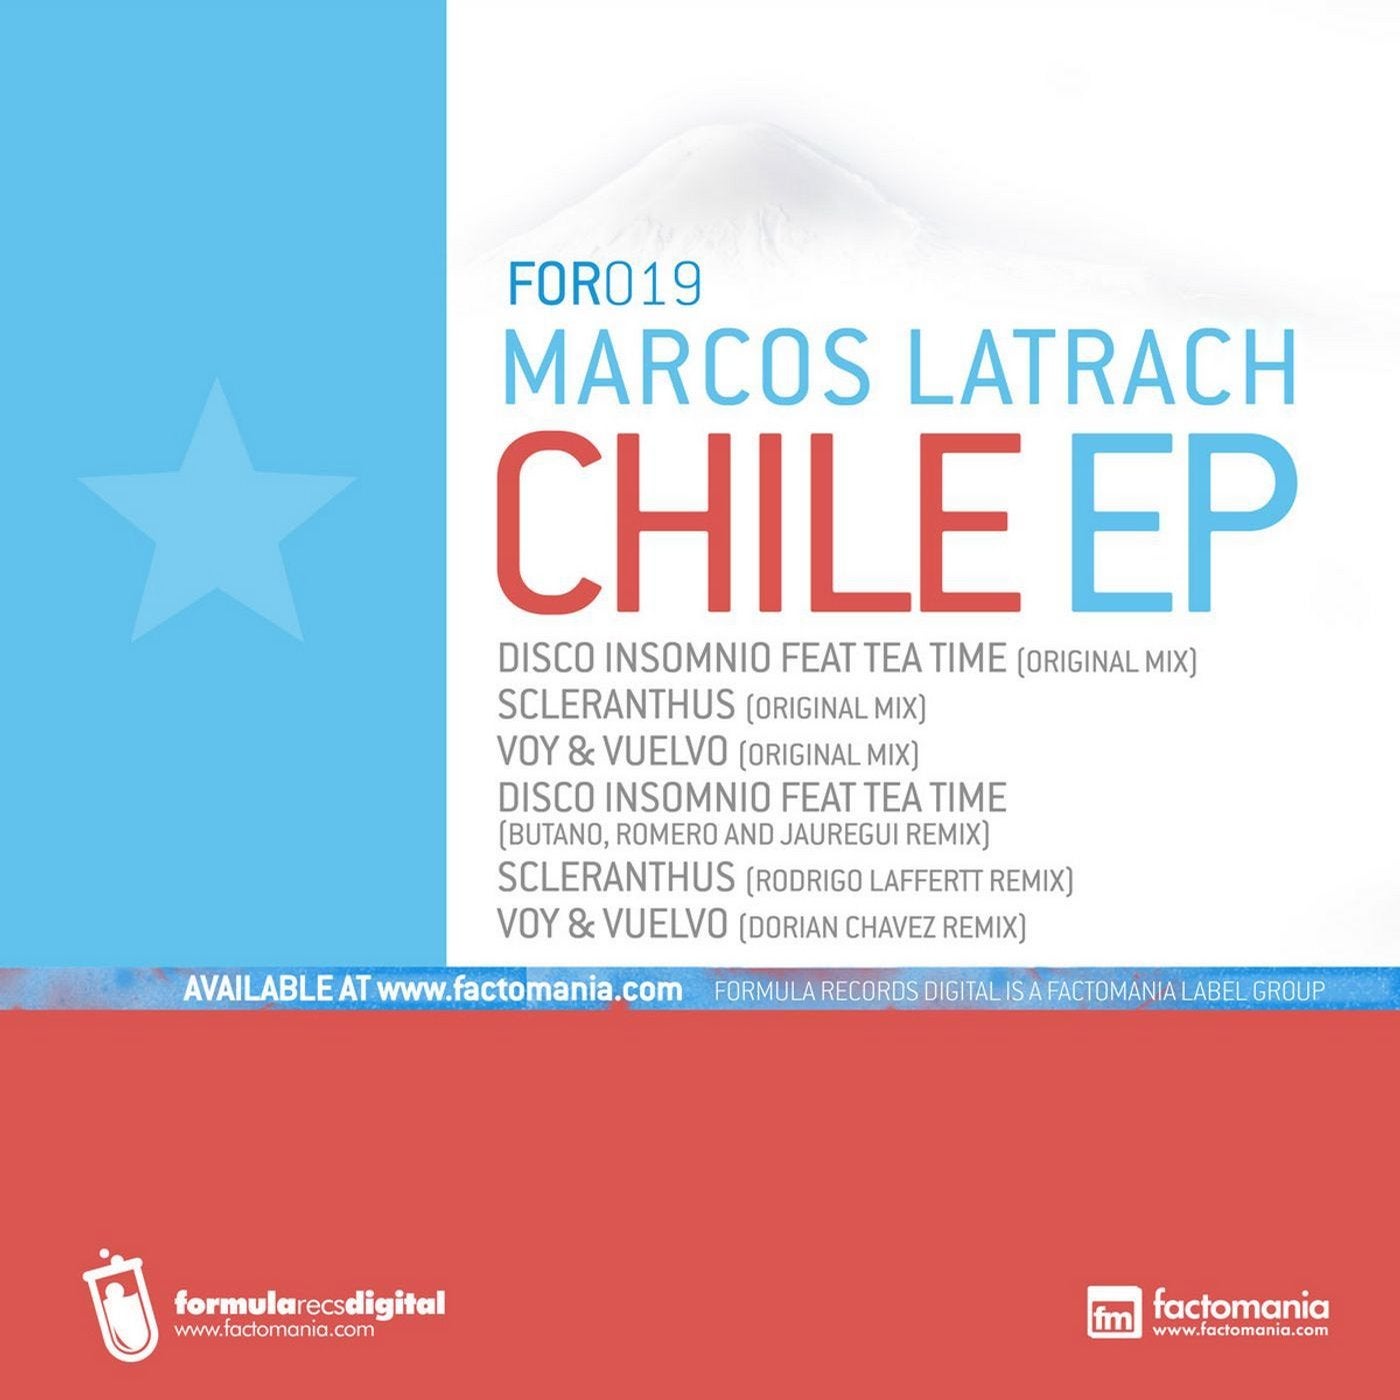 Chile EP